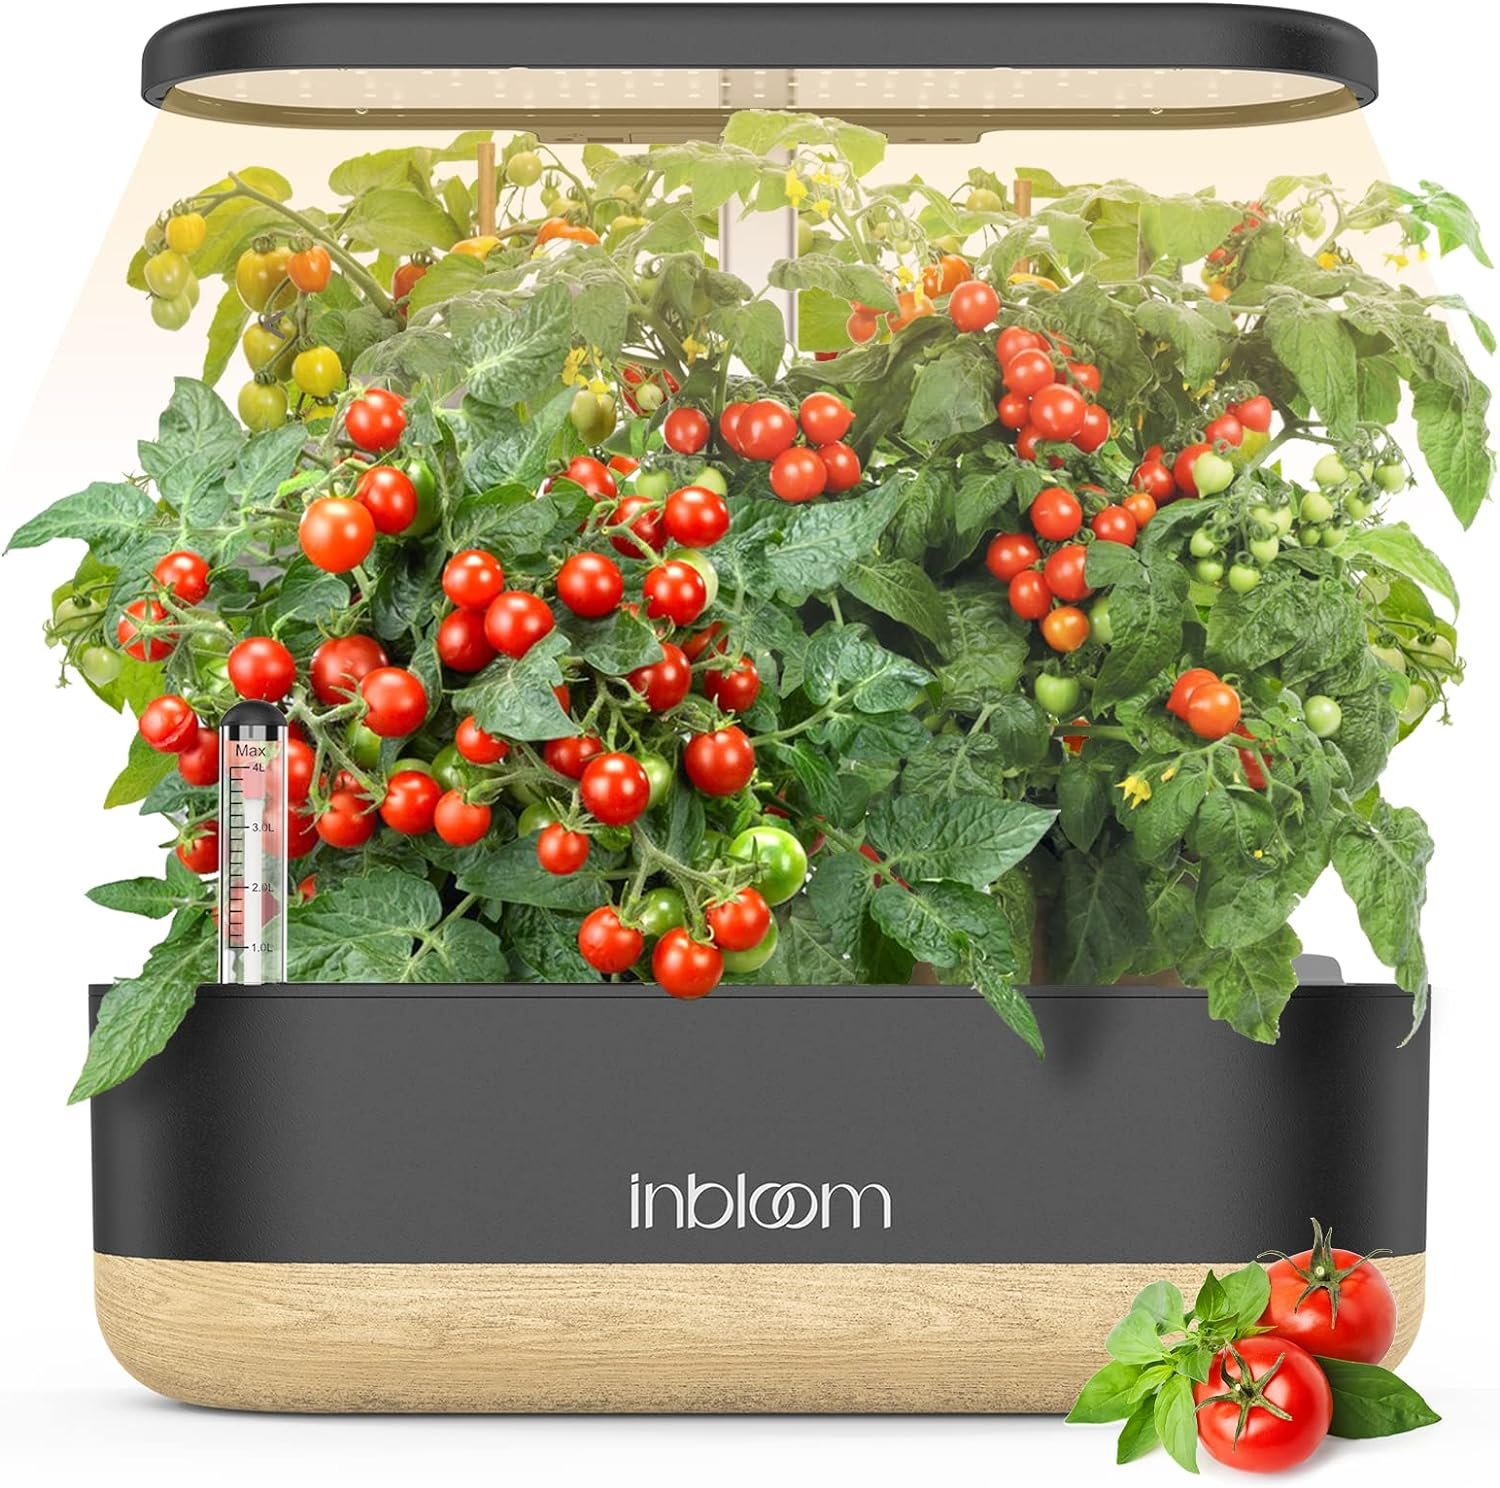 inbloom Hydroponics Growing System 10 Pods, Indoor Herb Garden with LEDs Full-Spectrum Plant Grow Light, Water Shortage Alarm, Automatic Timer, Height Adjustable, Ideal Gardening Gifts for Women